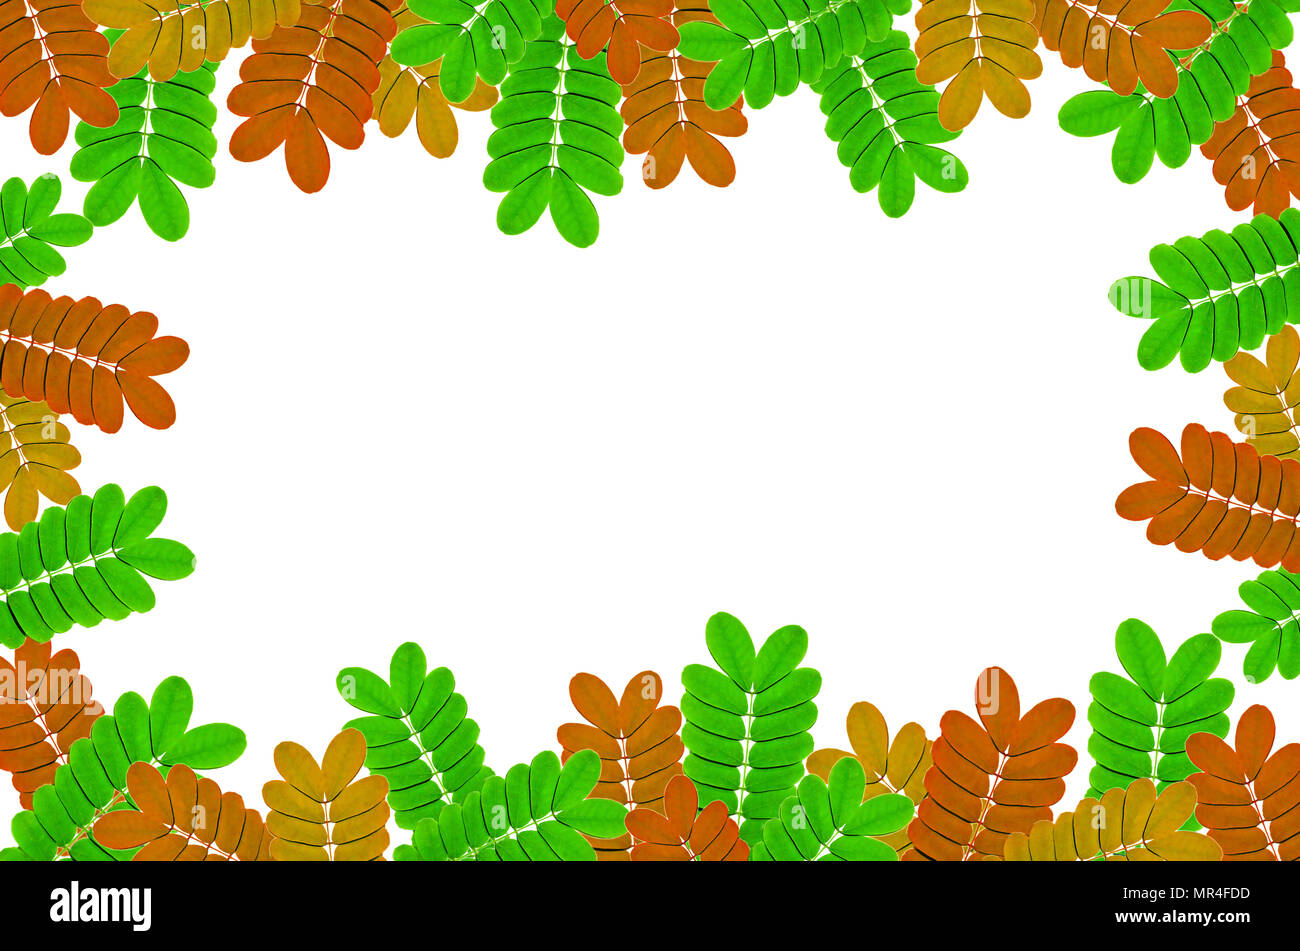 Frame from green leaves and fern on white background for isolated, Frame by green leaf and fern leaf, orange leaf and yellow leaf, Free space by green Stock Photo